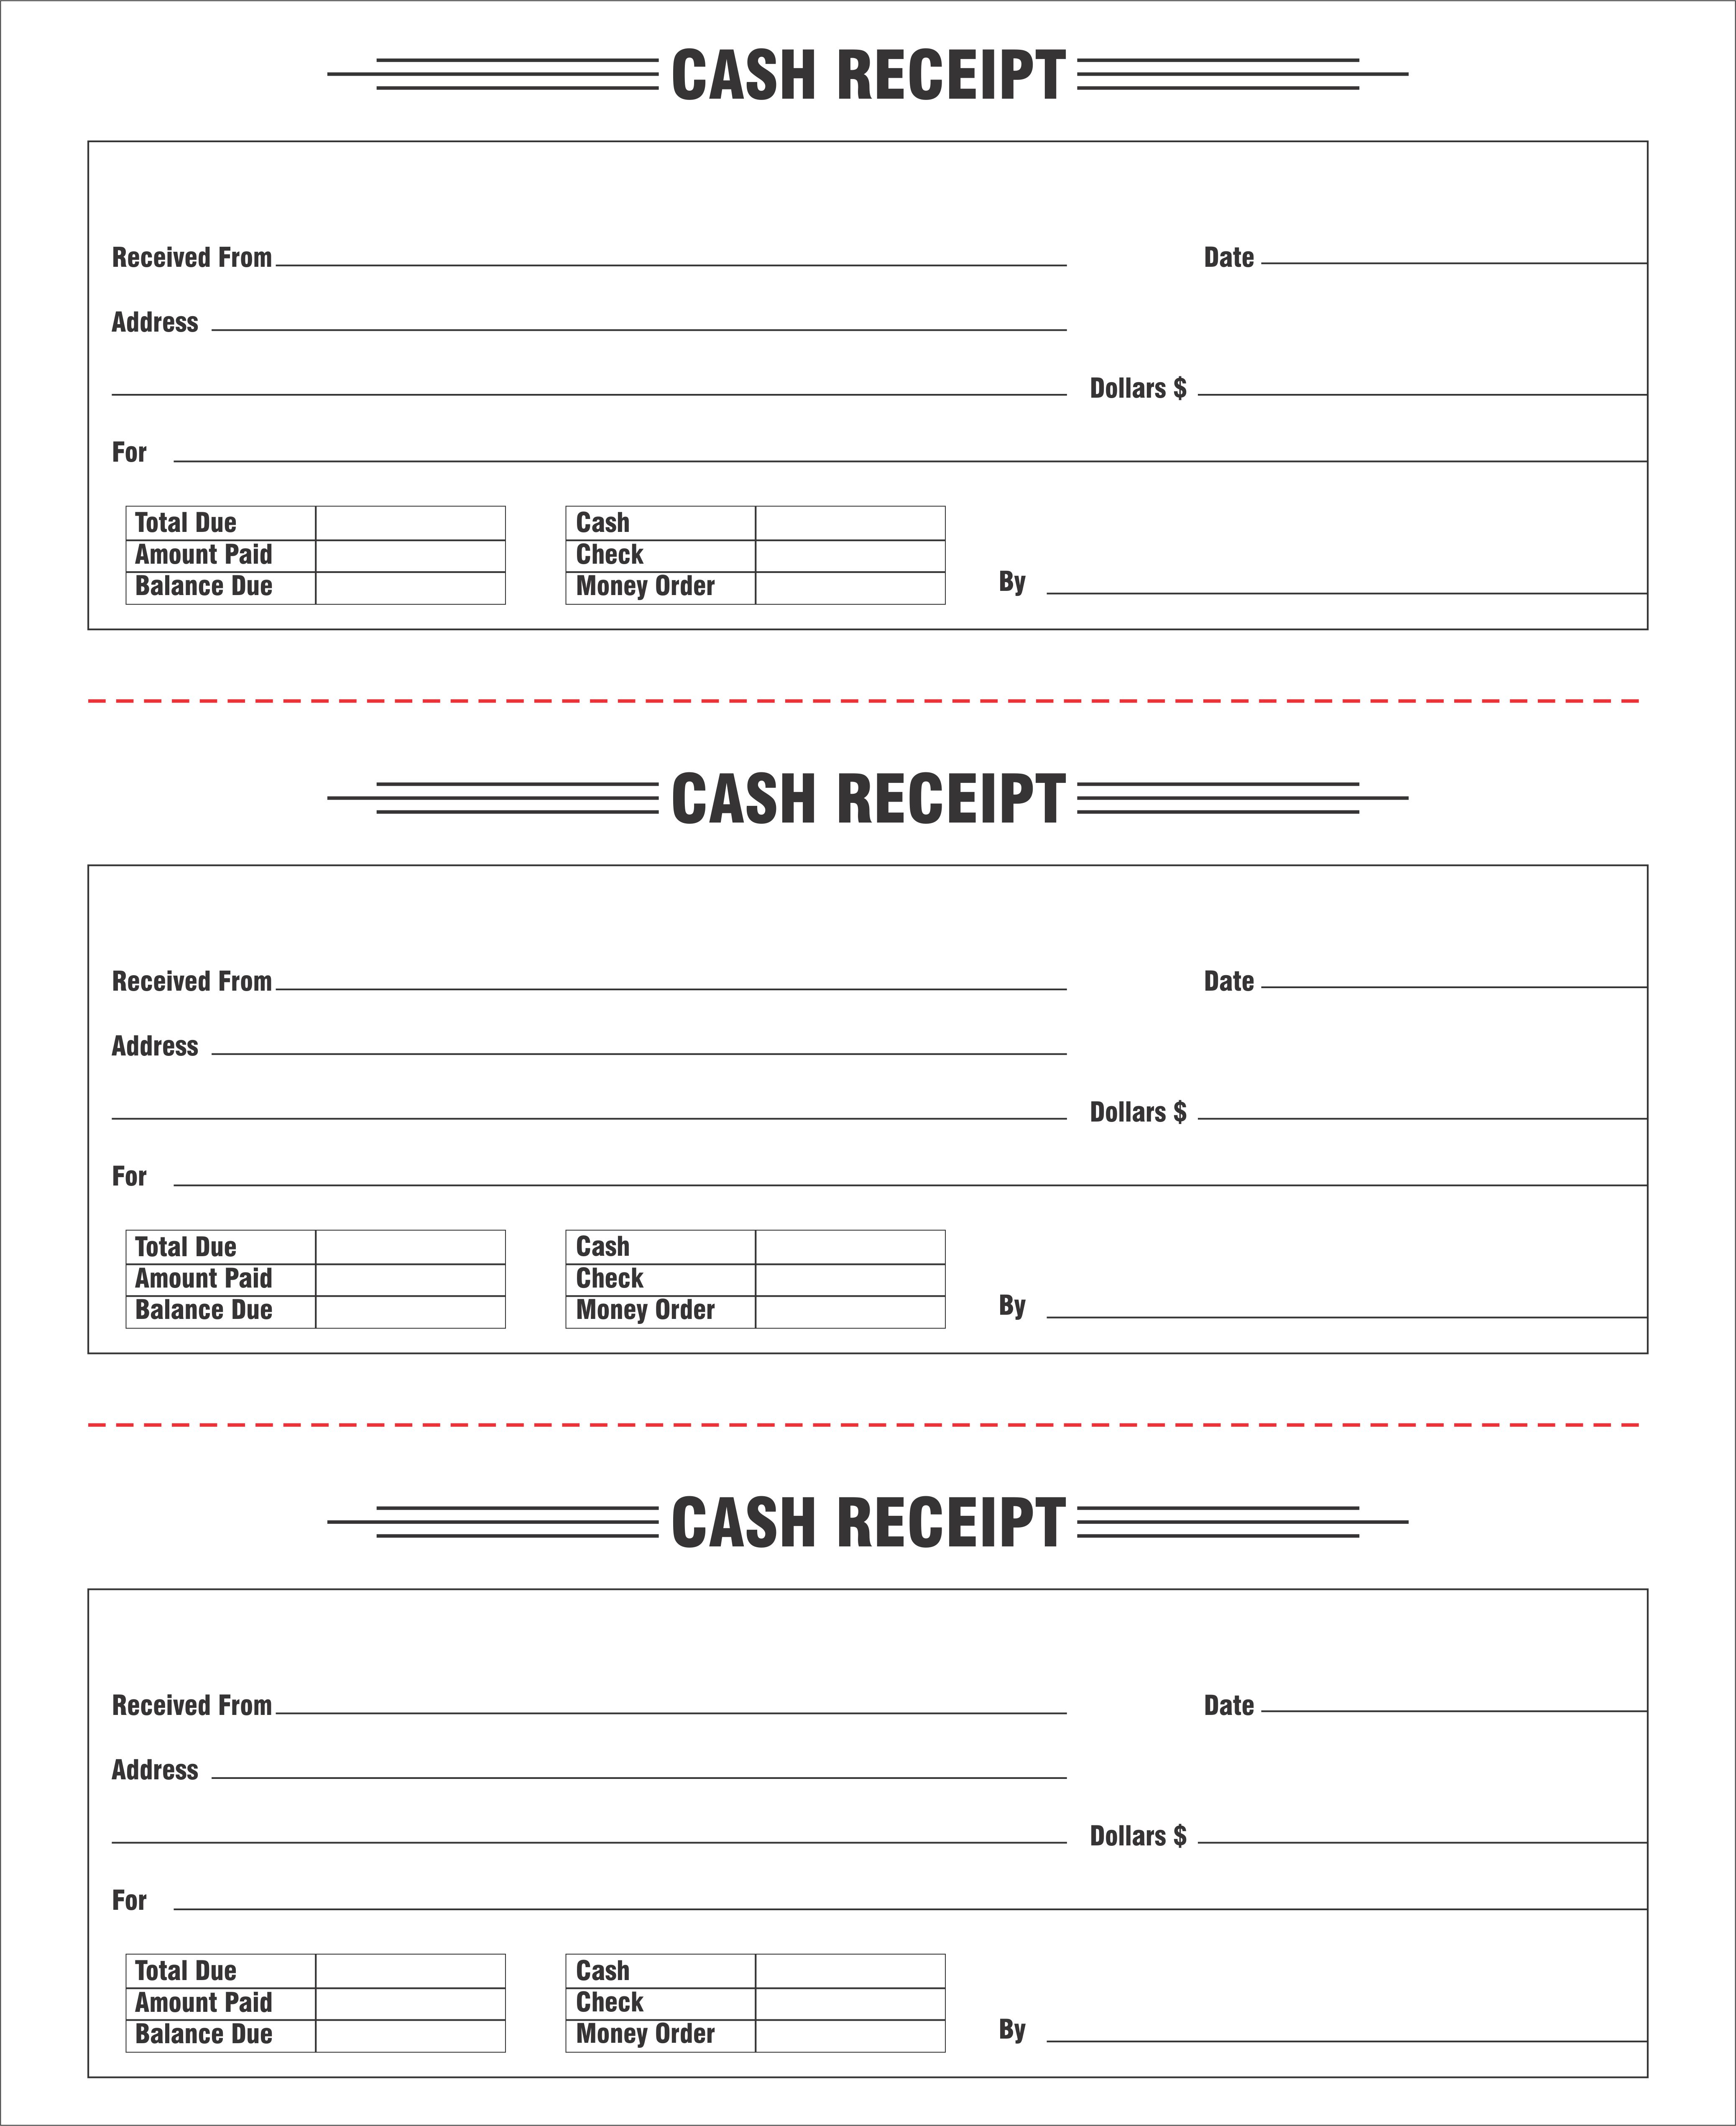 Custom Cash Receipt Forms Printing, 3 Receipts per page